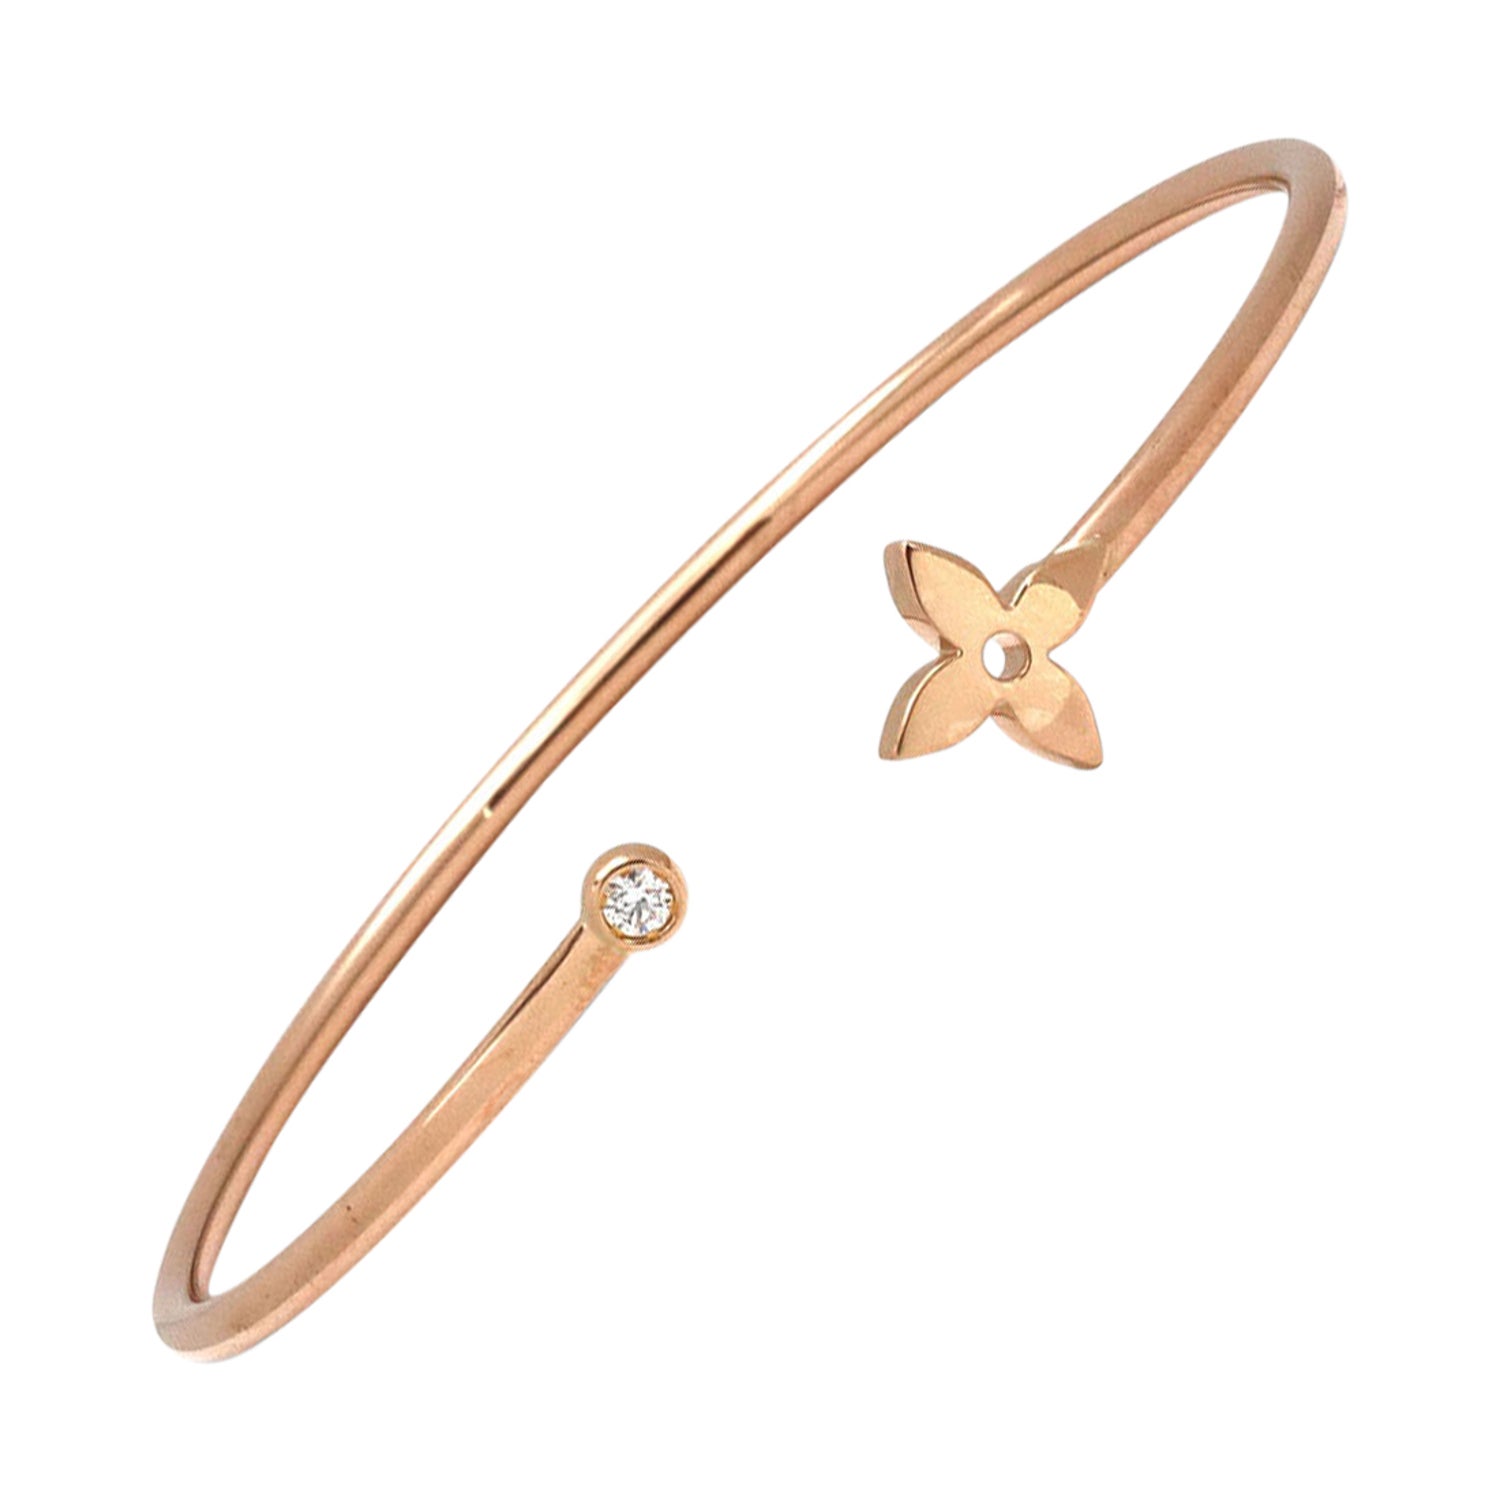 Products by Louis Vuitton: Idylle Blossom Twist Bracelet, Pink Gold